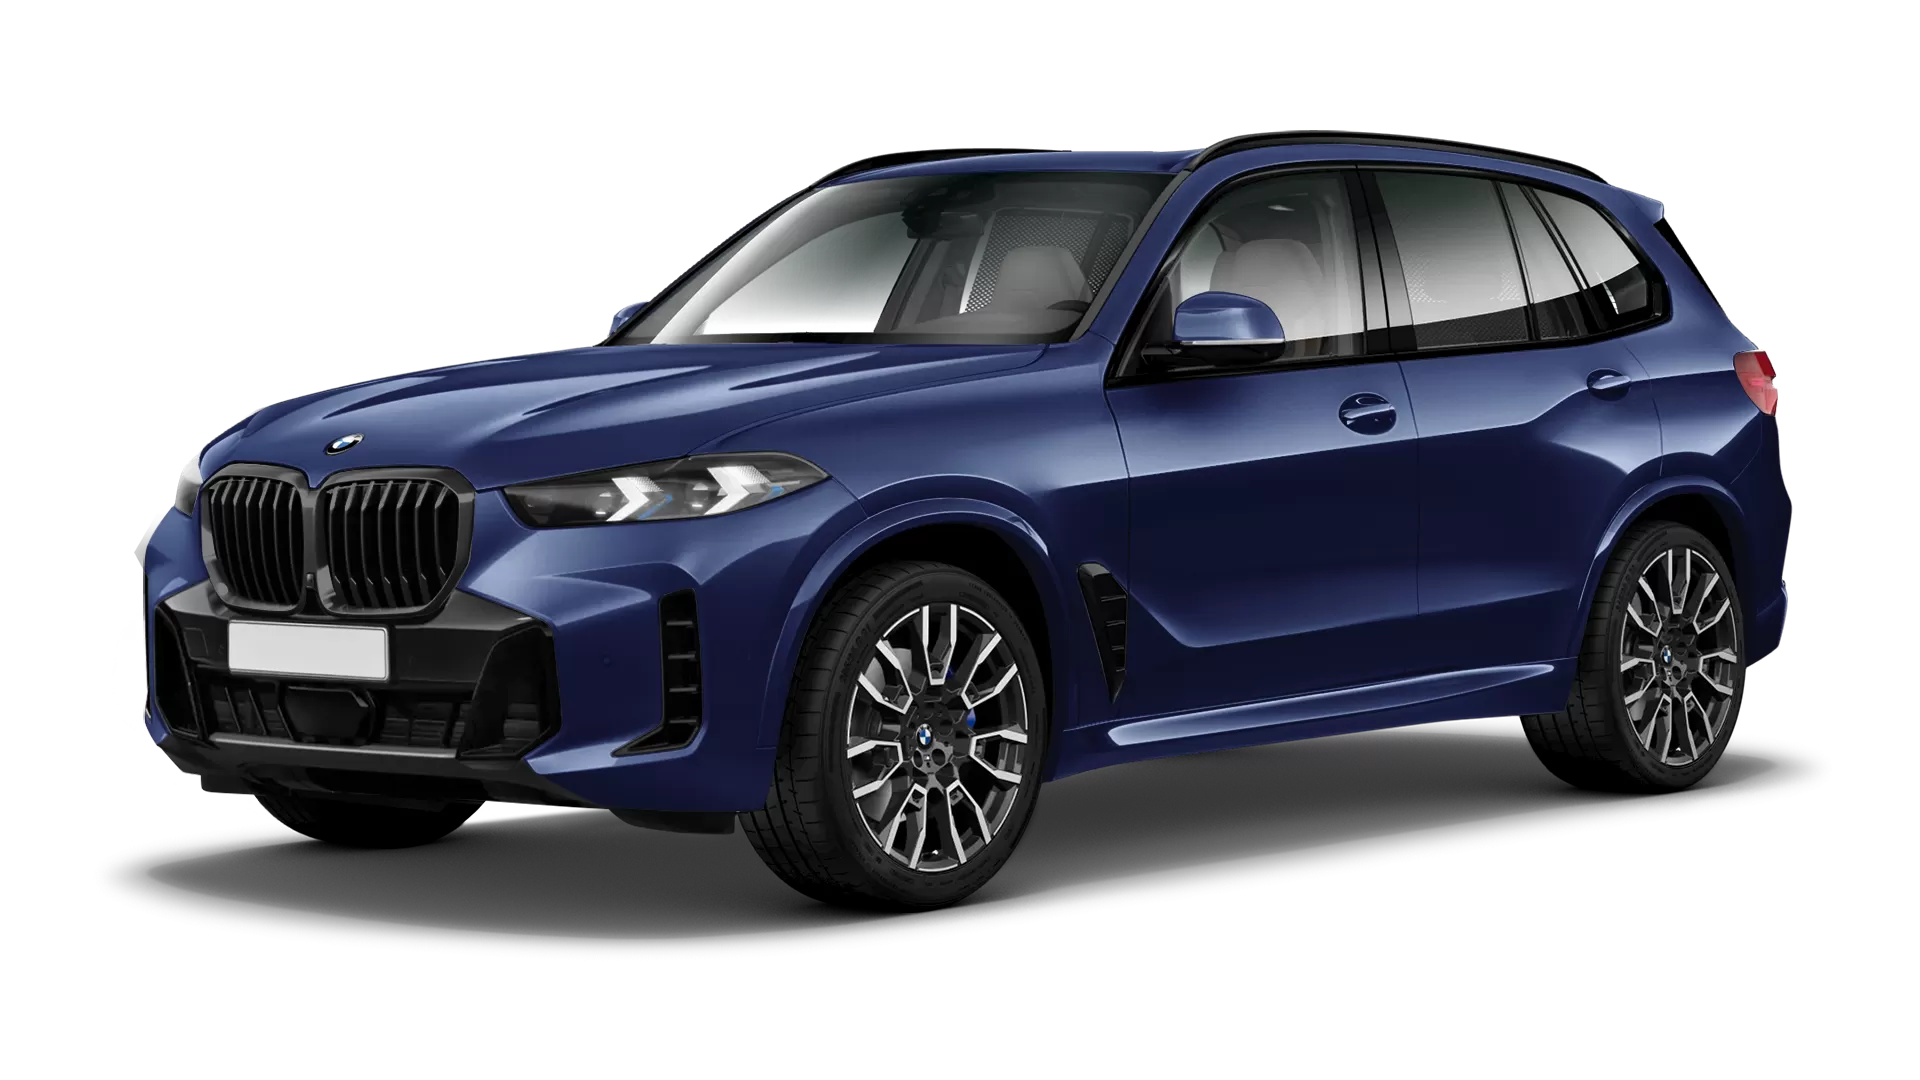 BMW X5 G05 LCI Facelift stock front view in Tanzanite Blue color